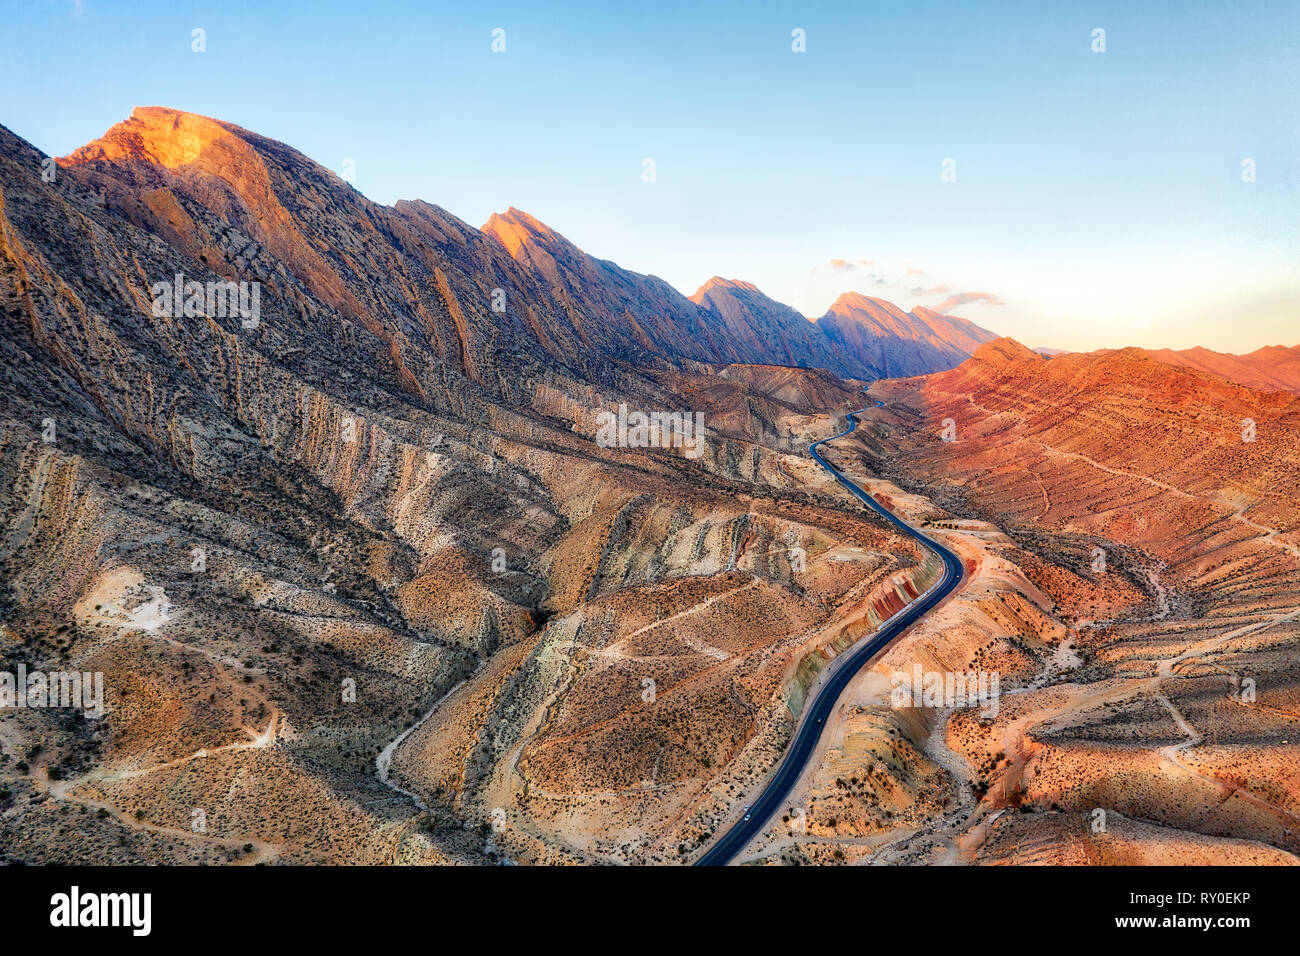 Road through the Zagros Mountains in South Iran taken in January 2019 taken in hdr Stock Photo